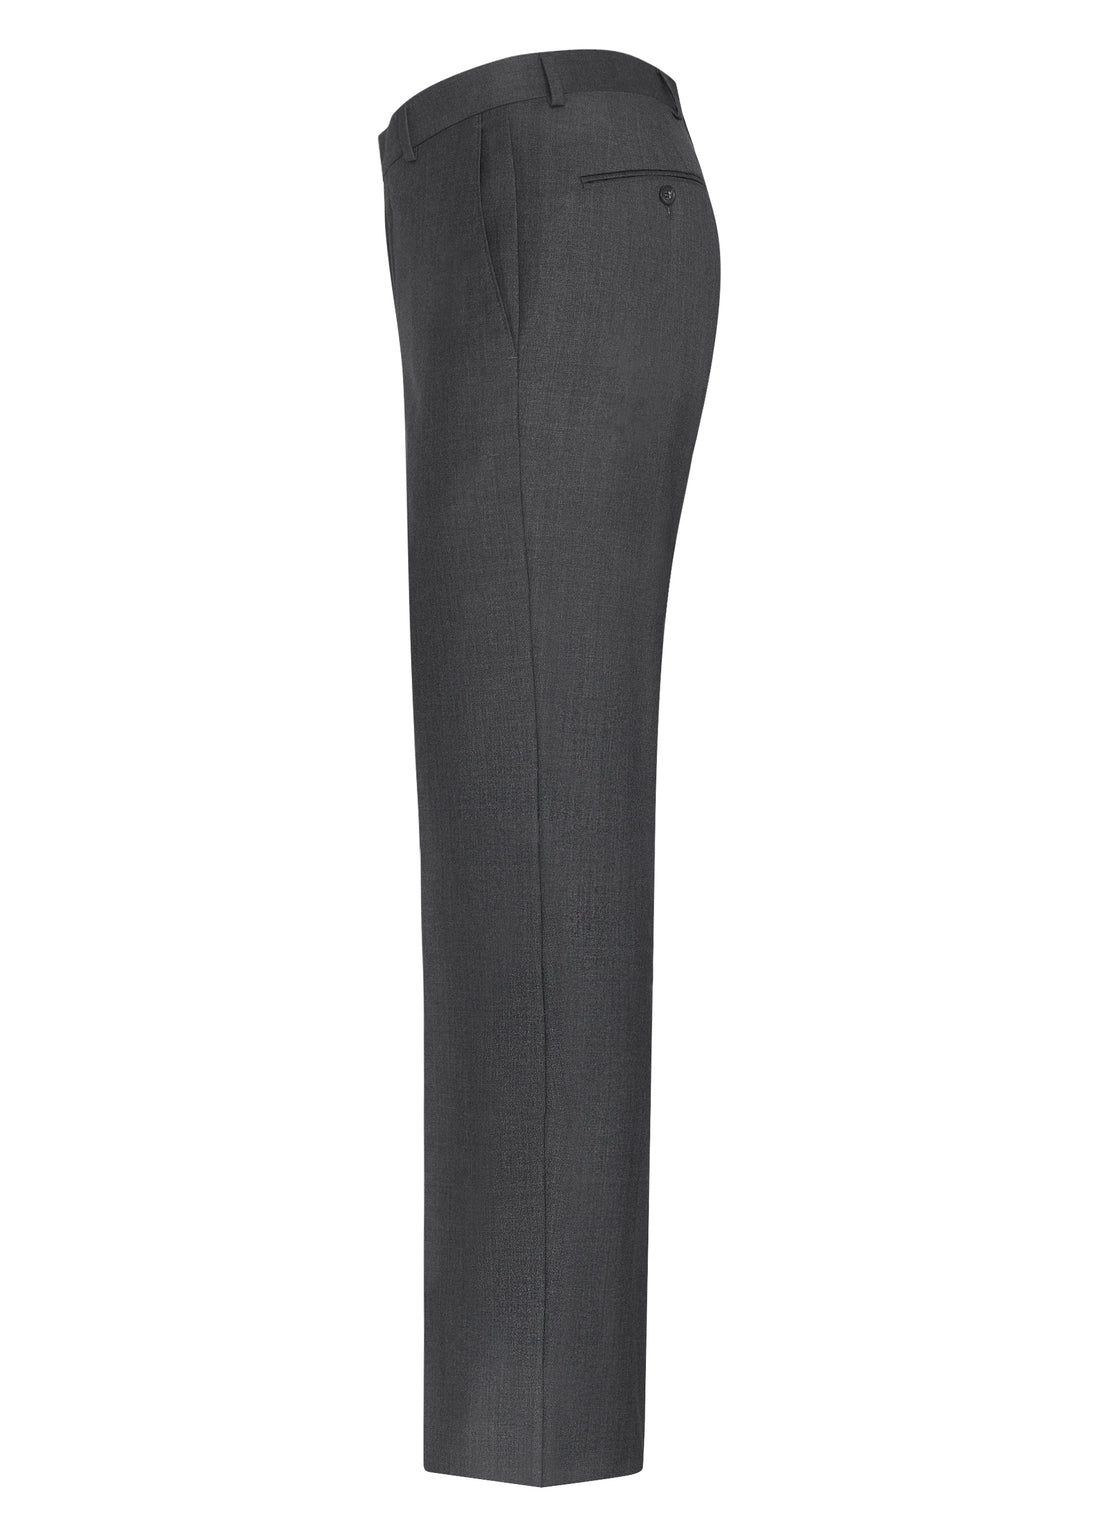 Grey Flat Front Trousers - Classic Fit Grey Flat Front Trousers - Classic Fit 